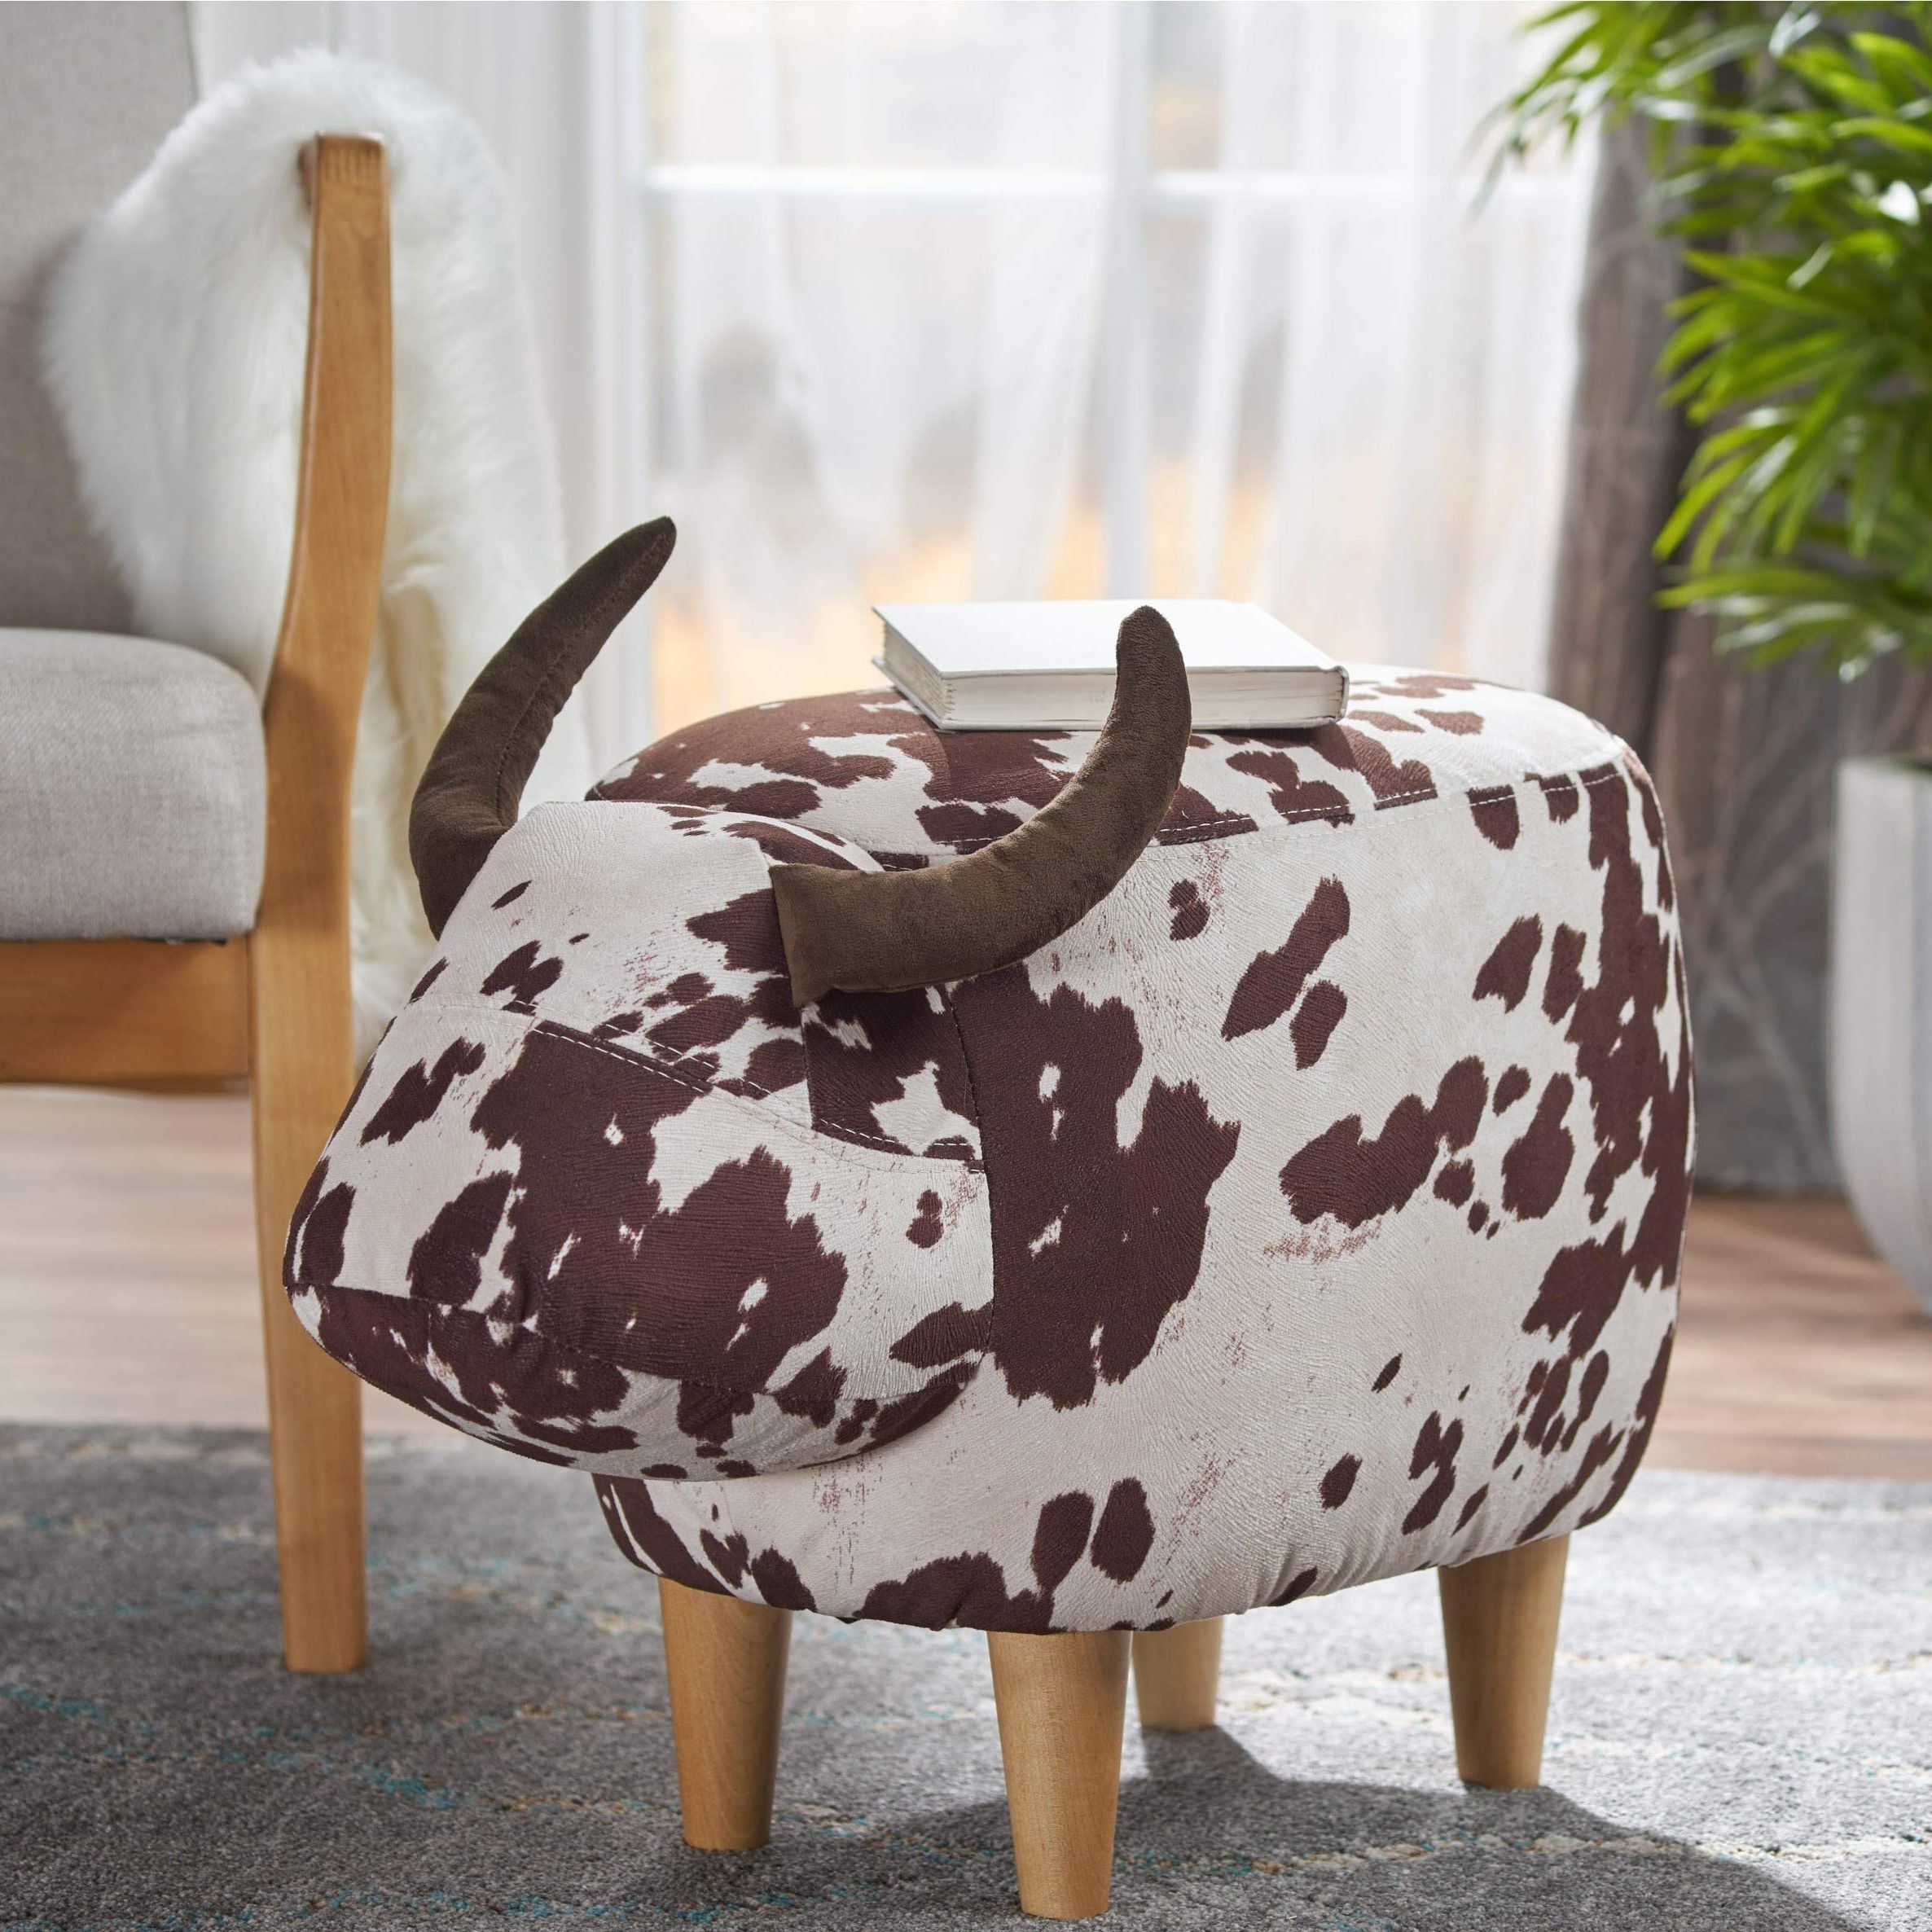 Most Up To Date White Cow Hide Ottomans Intended For Amazon: Childrens Cow Ottomans, Natural White Brown Dairy Cows Shaped  Ottoman, Brown Horns Rustic Farm Animal Theme Footstool, Cute Kids Room  Decor Velvet Faux Cowhide Pattern Footrest Stool,  (View 5 of 10)